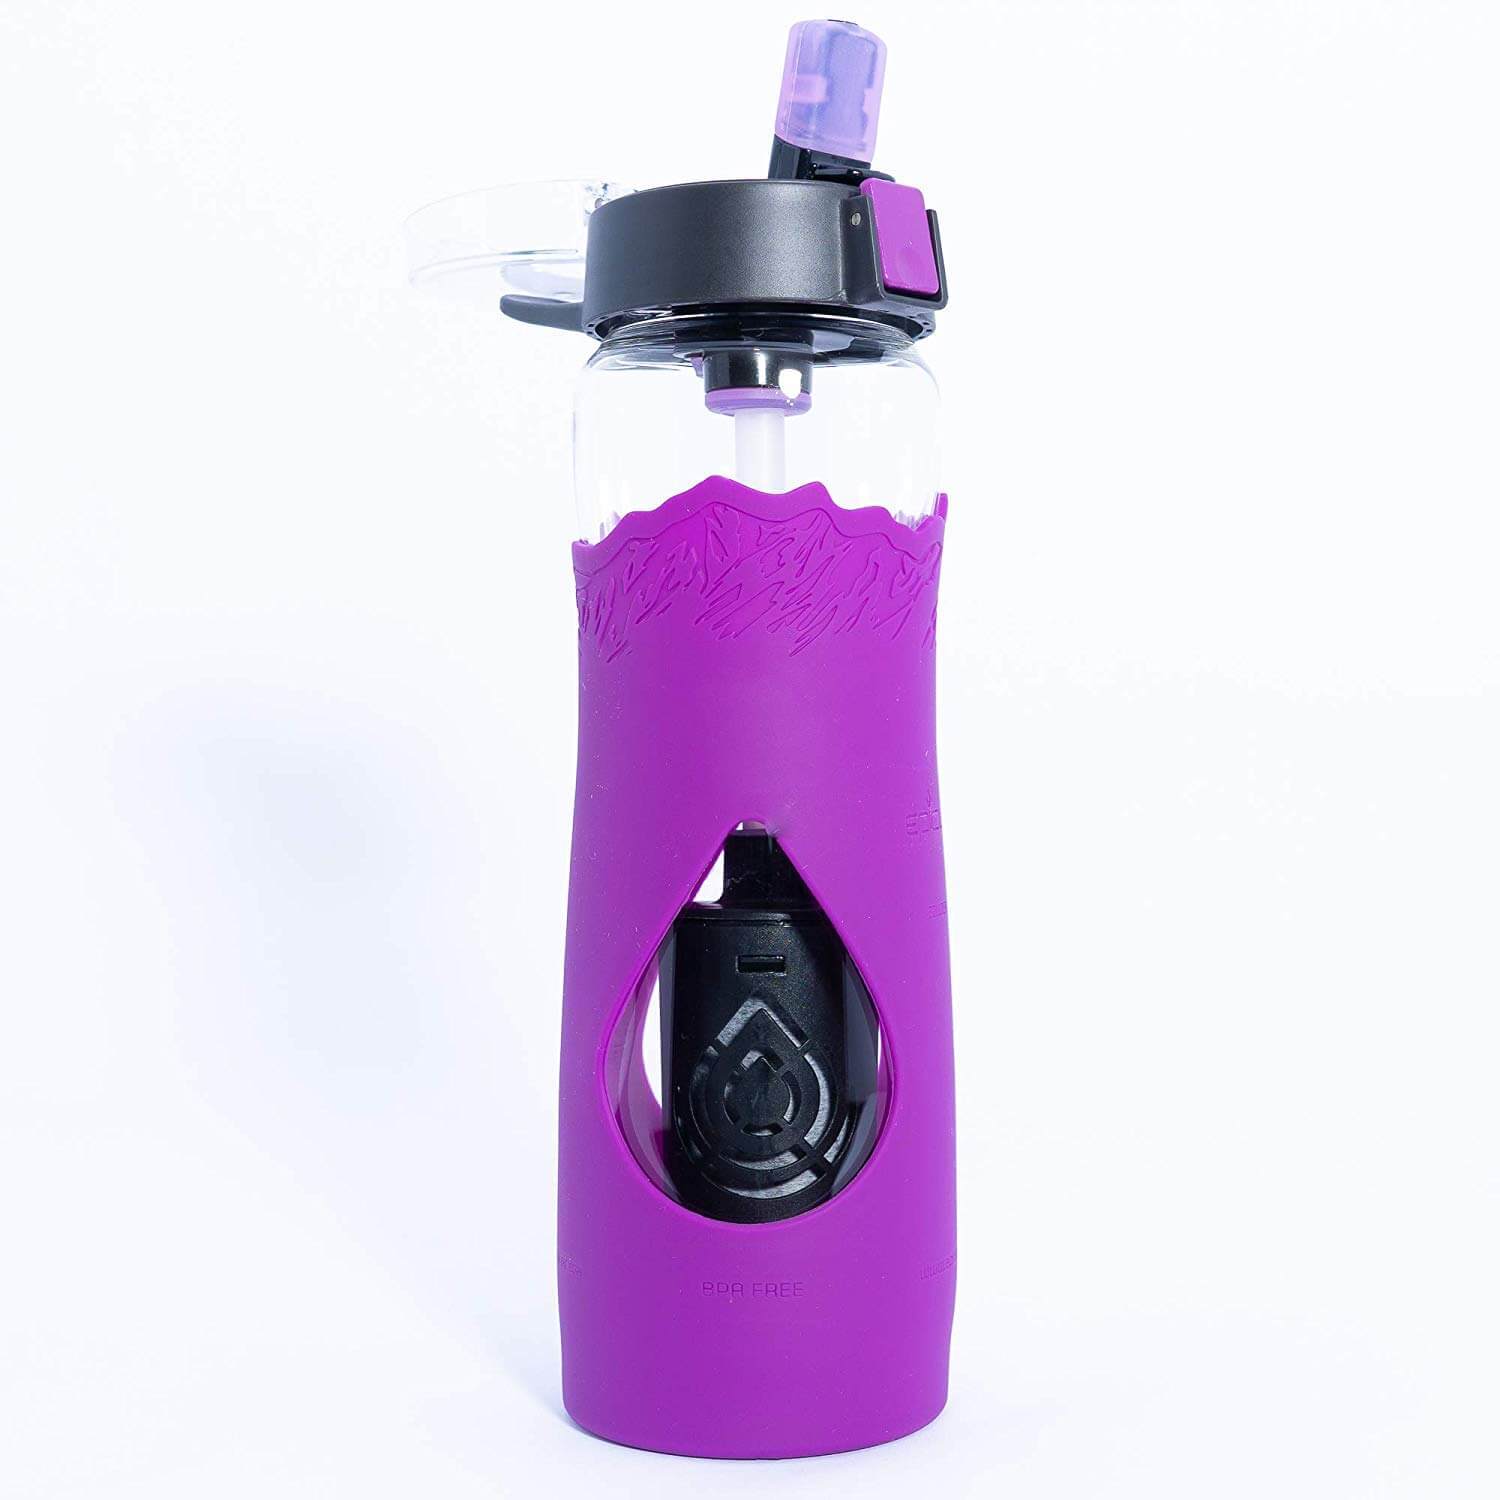 Escape Glass Filtered Water Bottle - Best Glass Filtered Water Bottle